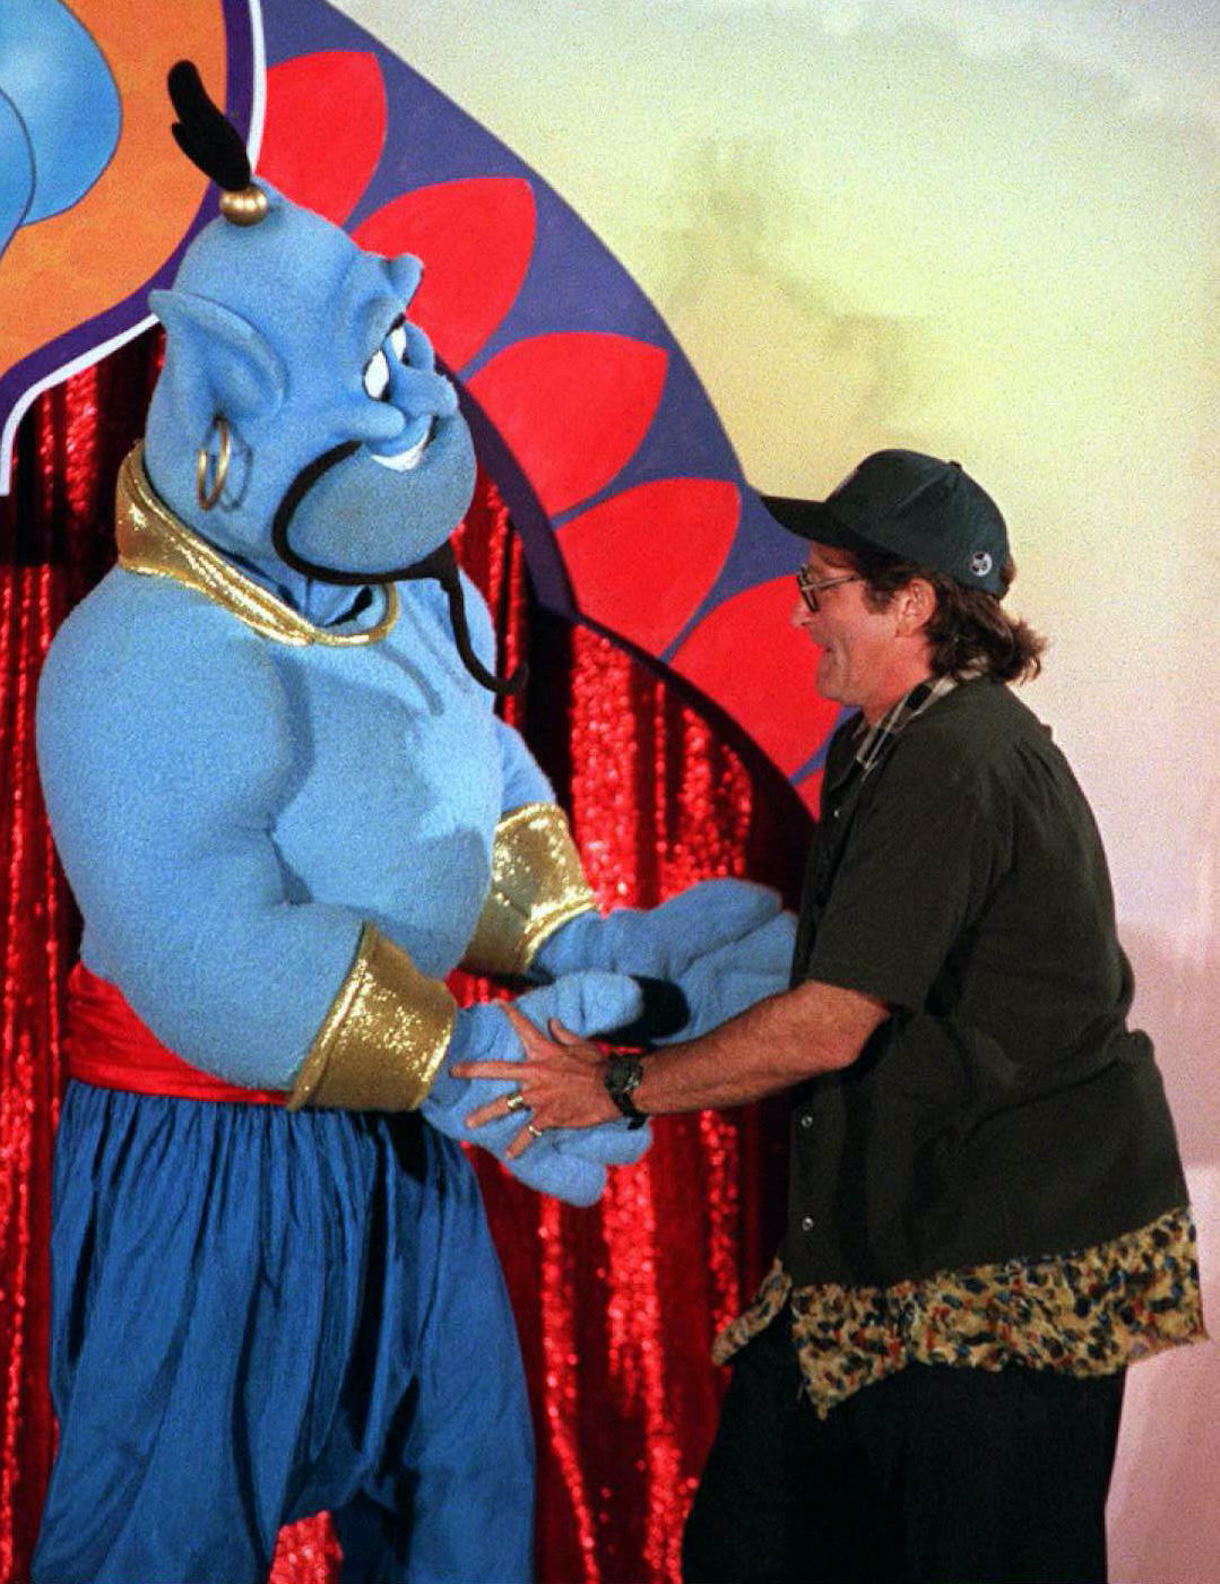 Actor-comedian Robin Williams dances 10 July in Los Angeles with the Disney character "Genie" during a celebration for the scheduled 13 August world release of the film 'Aladdin'